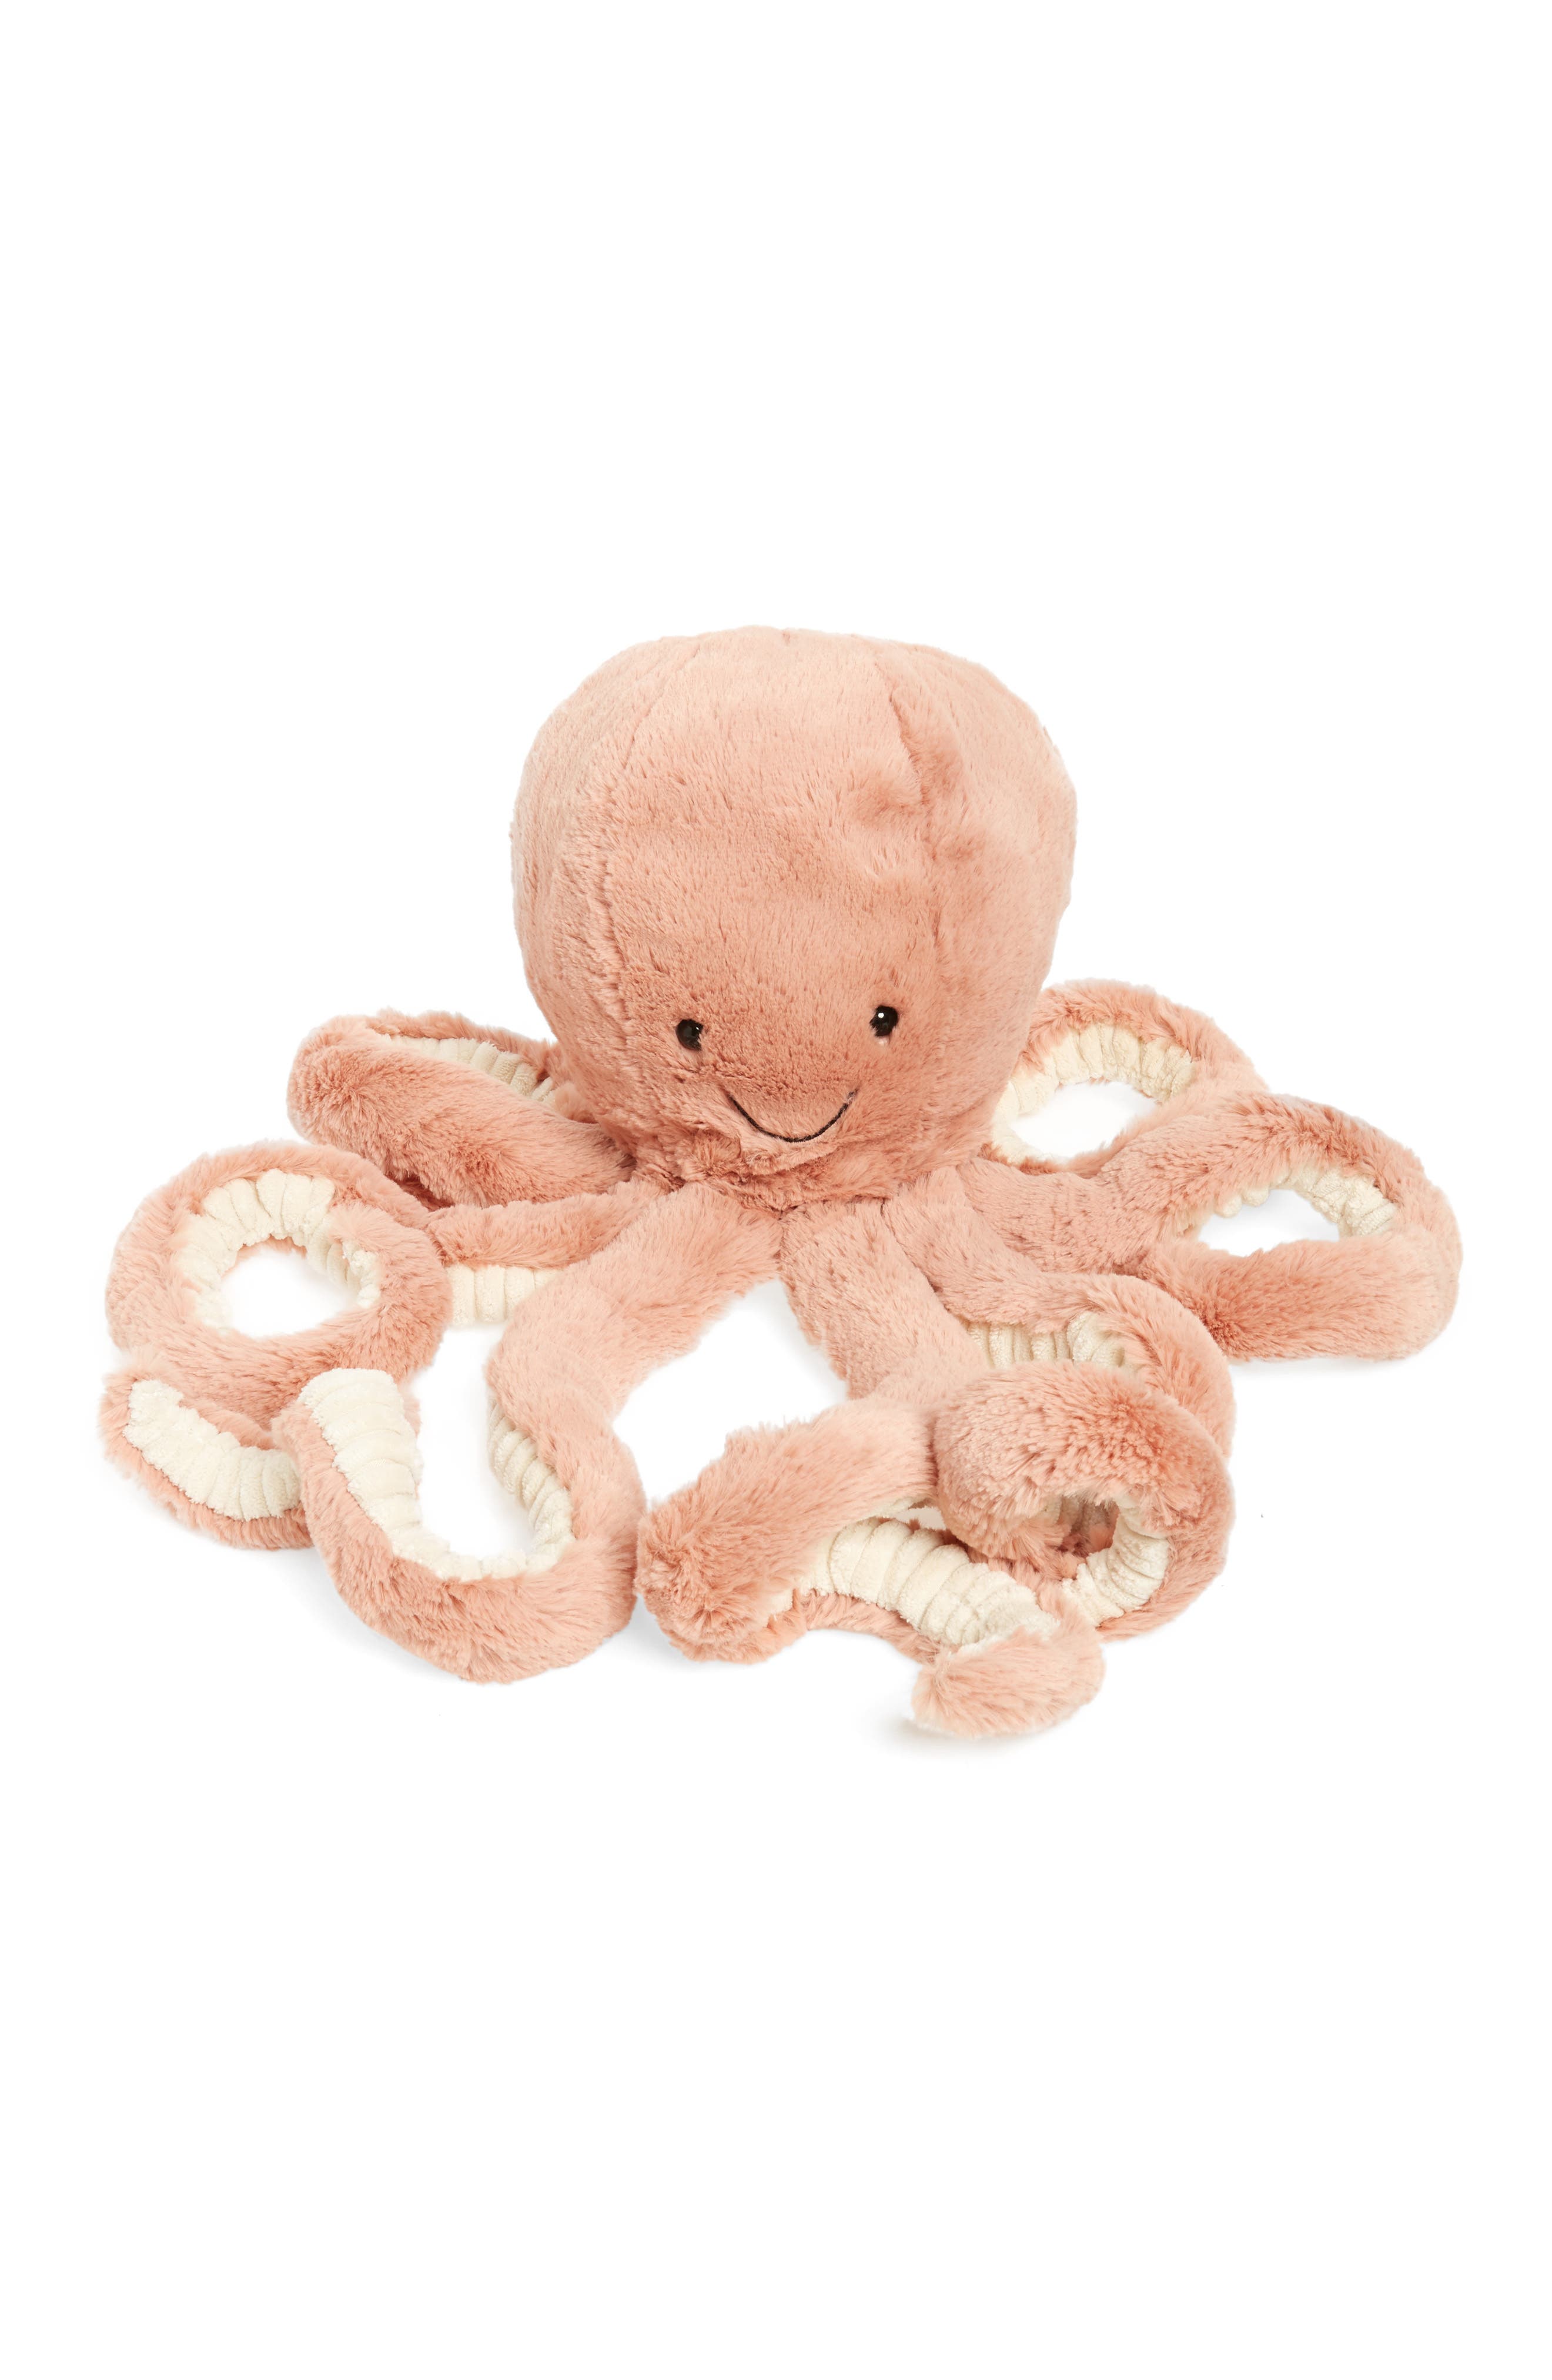 odell octopus large